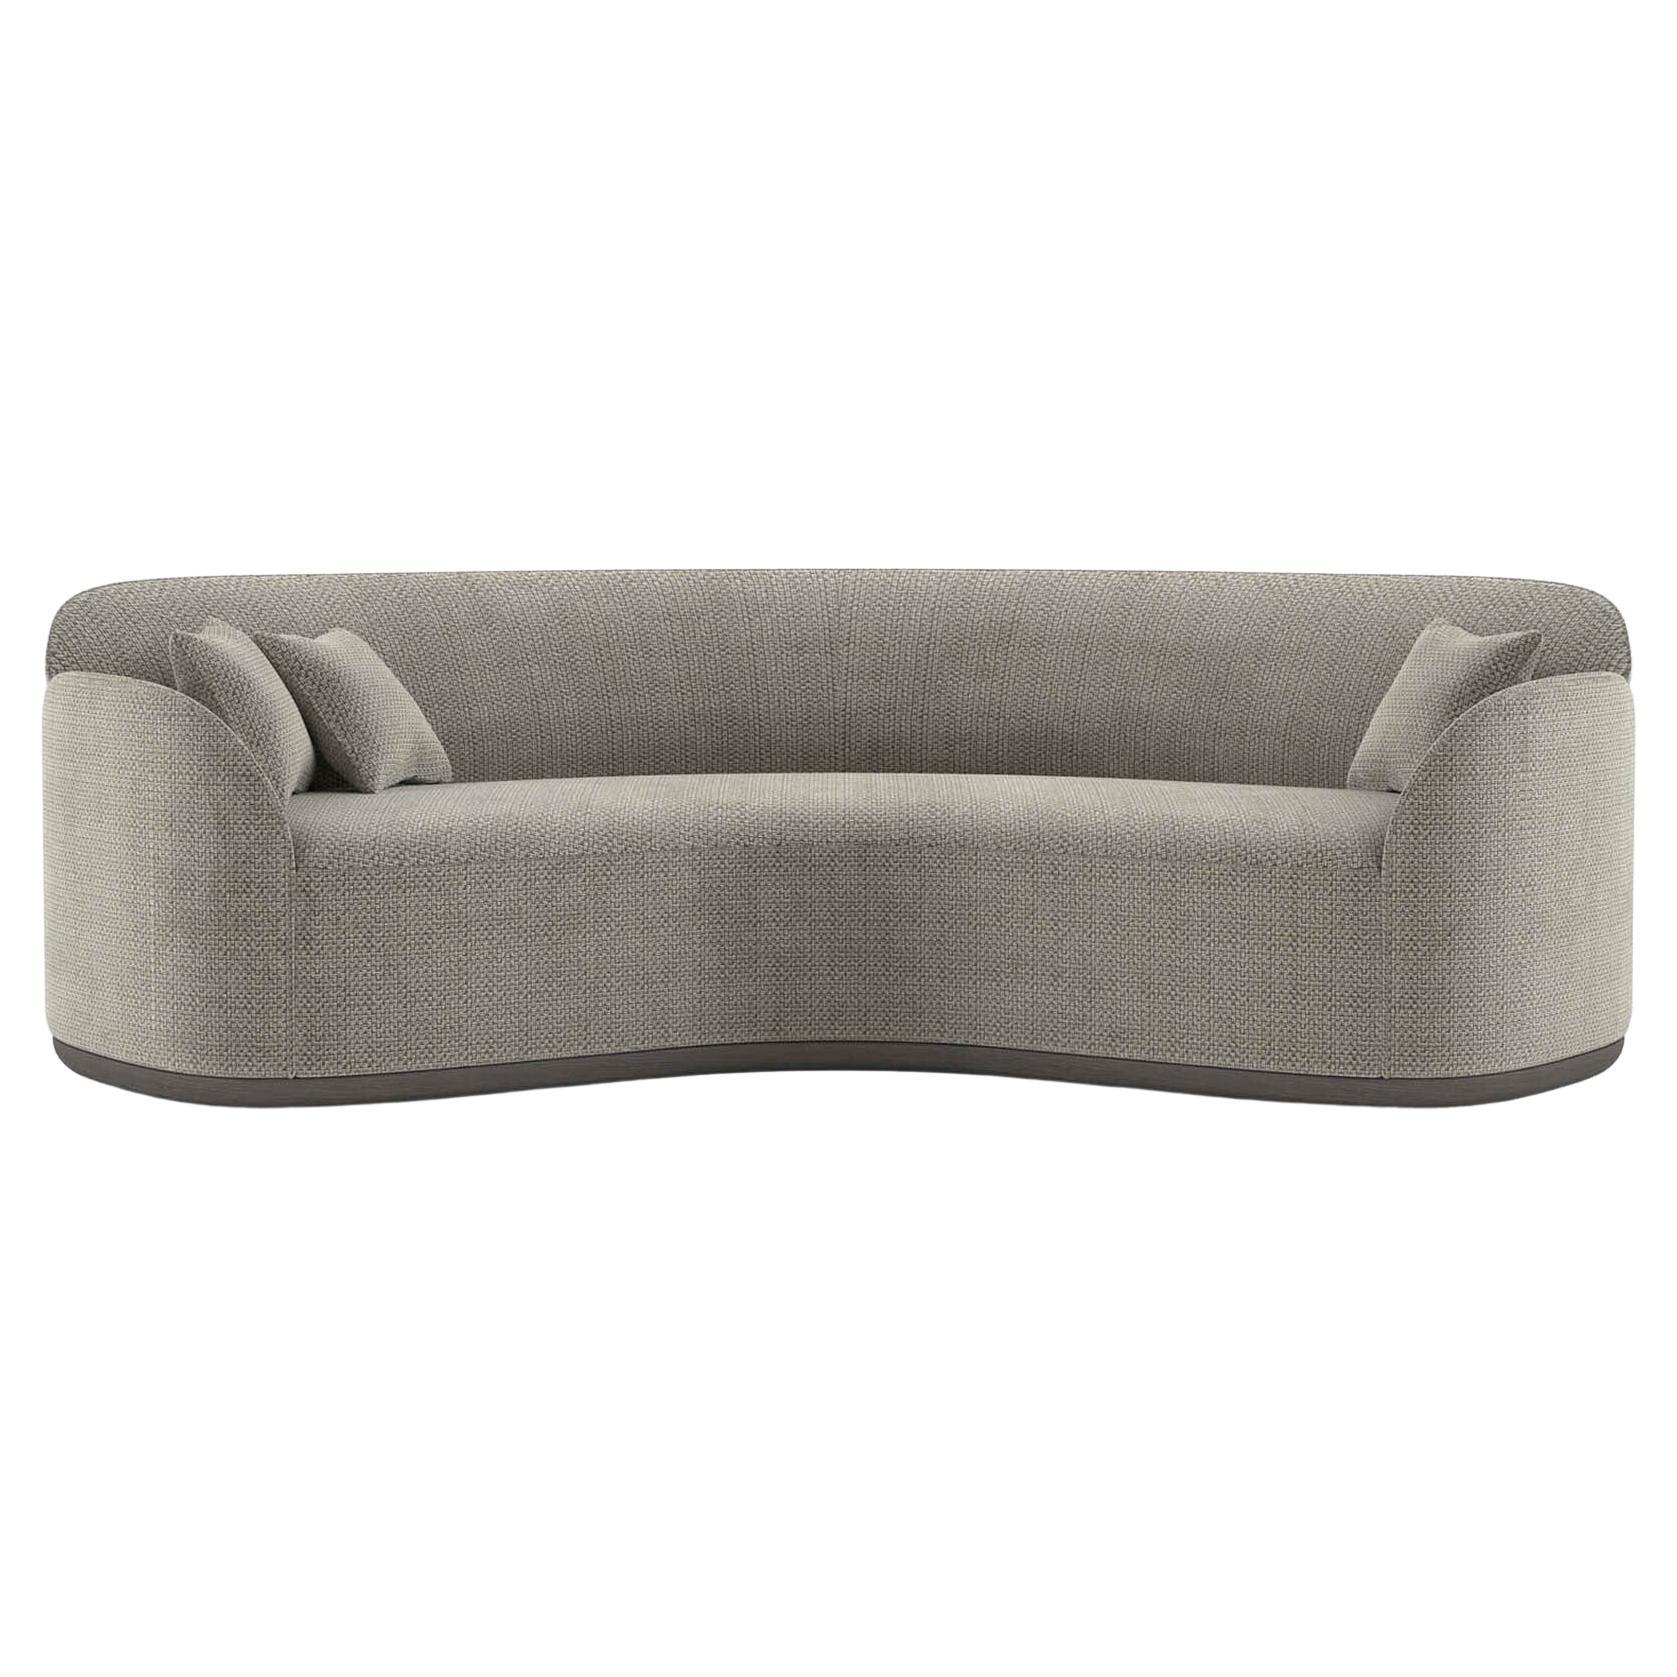 Contemporary Curved Sofa 'Unio' by Poiat, Hanoi 04 by Pierre Frey For Sale